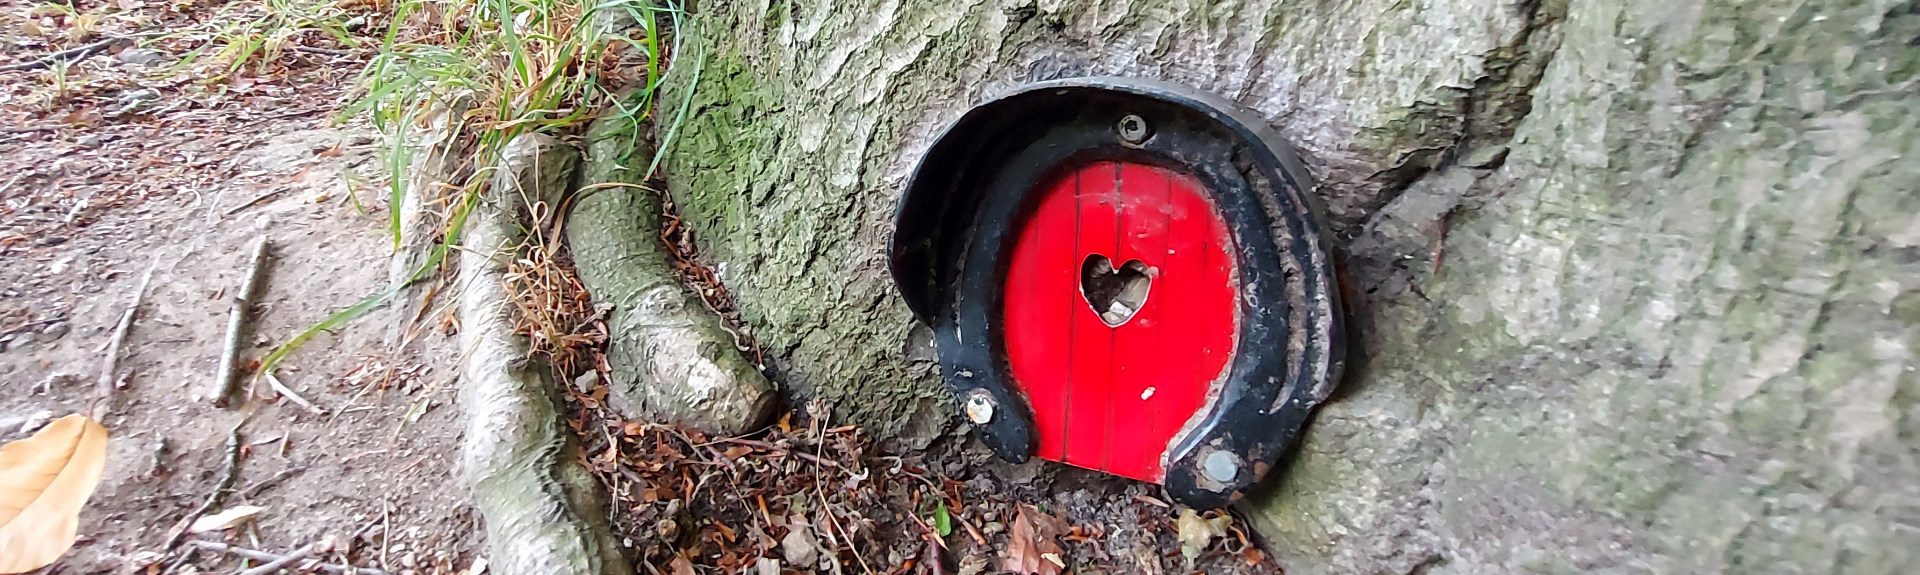 Gnome house in a tree